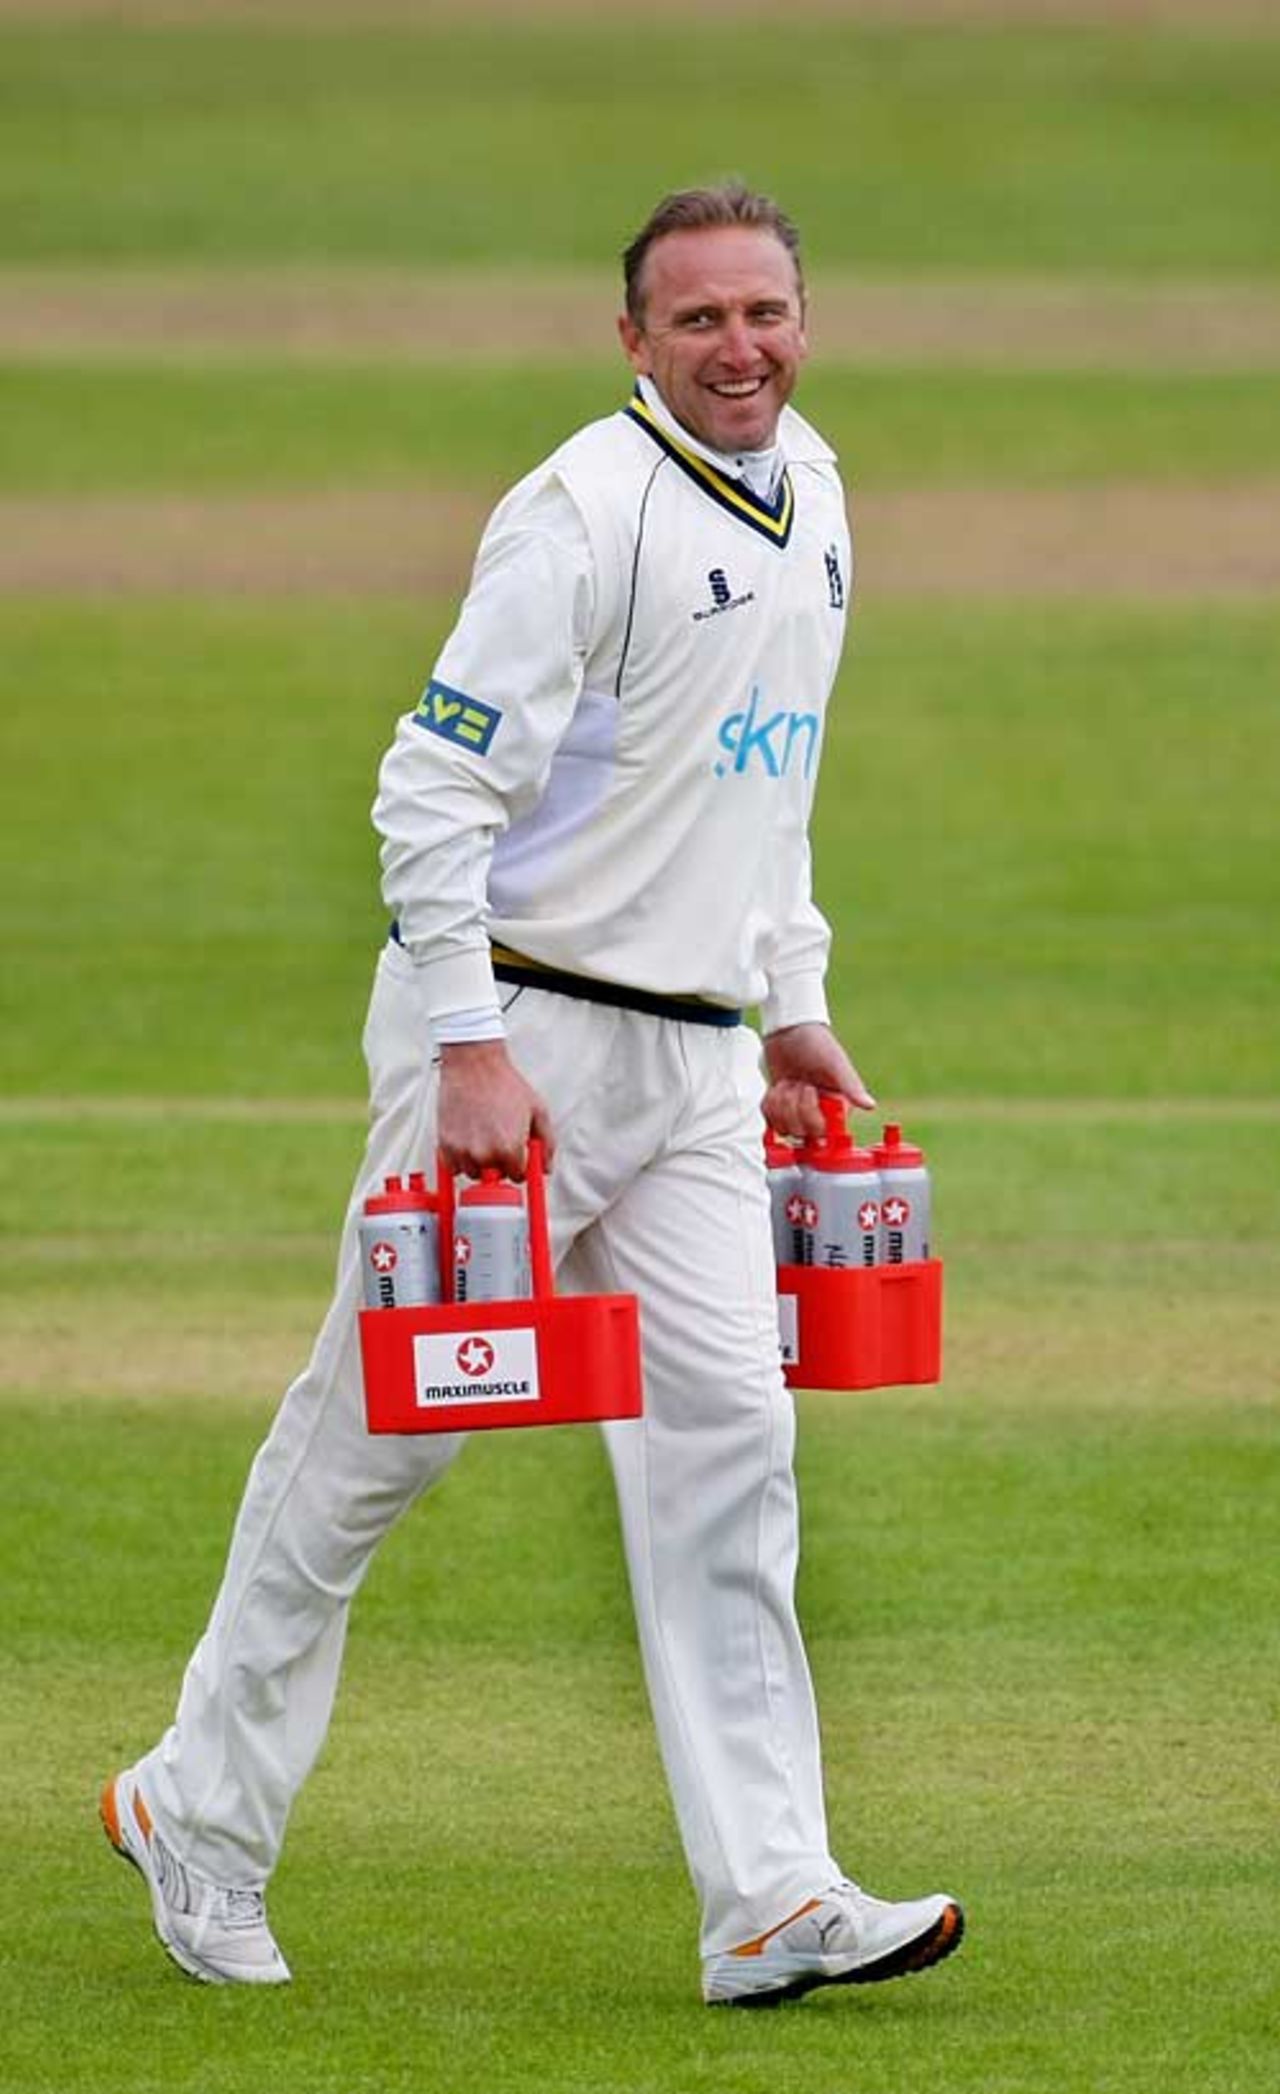 Allan Donald carries the drinks for Warwickshire, Somerset v Warwickshire, County Championship Division One, Taunton, April 17, 2009